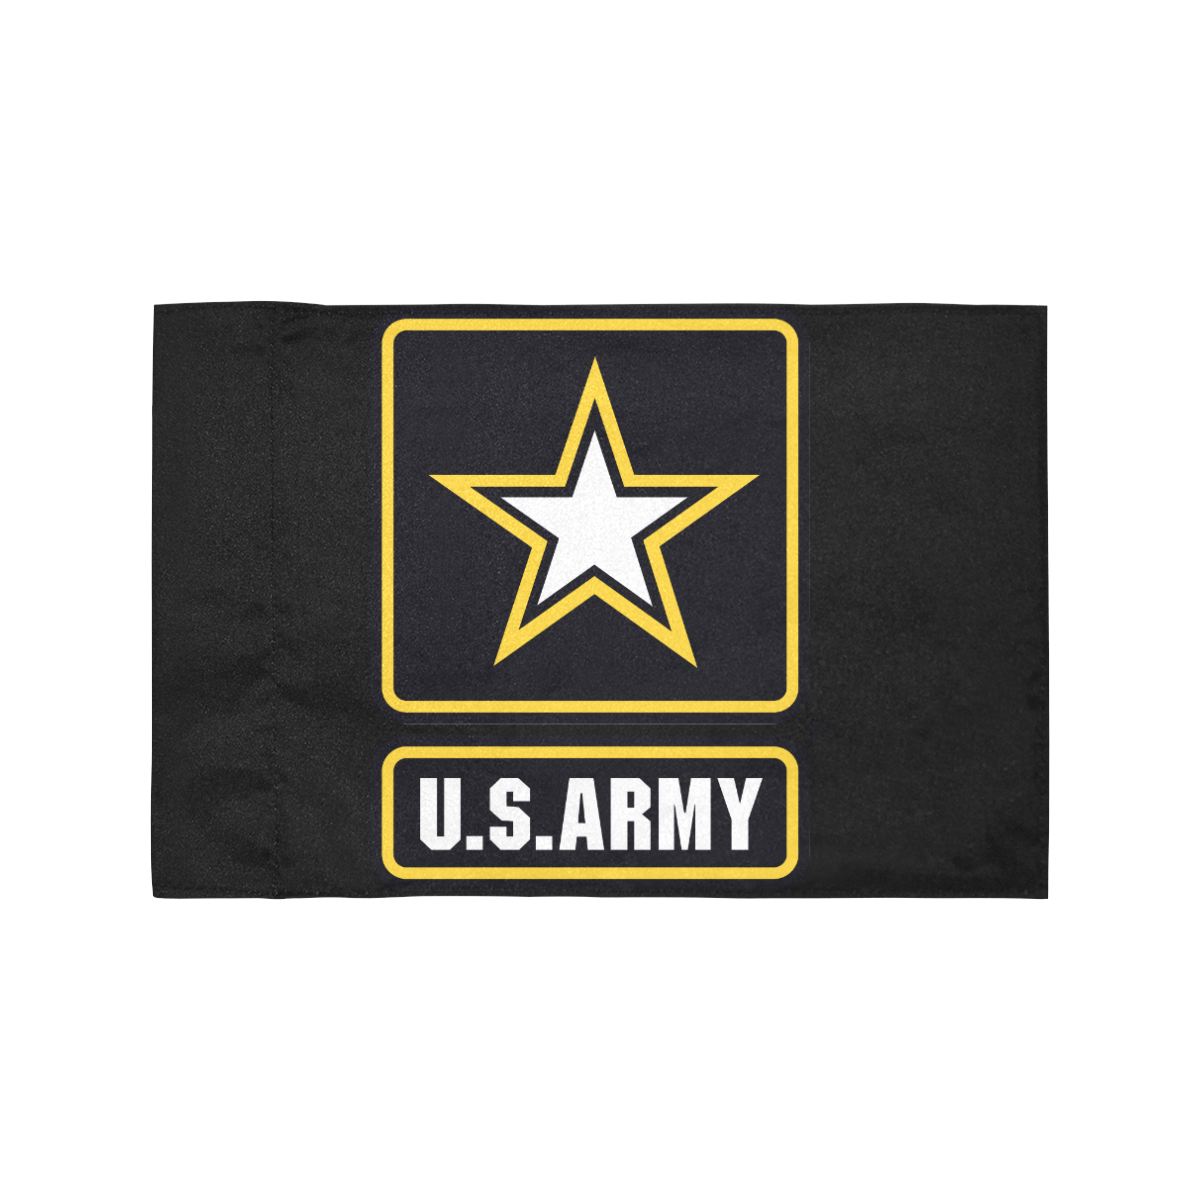 USArmy Gold Star Logo Motorcycle Flag (Twin Sides)